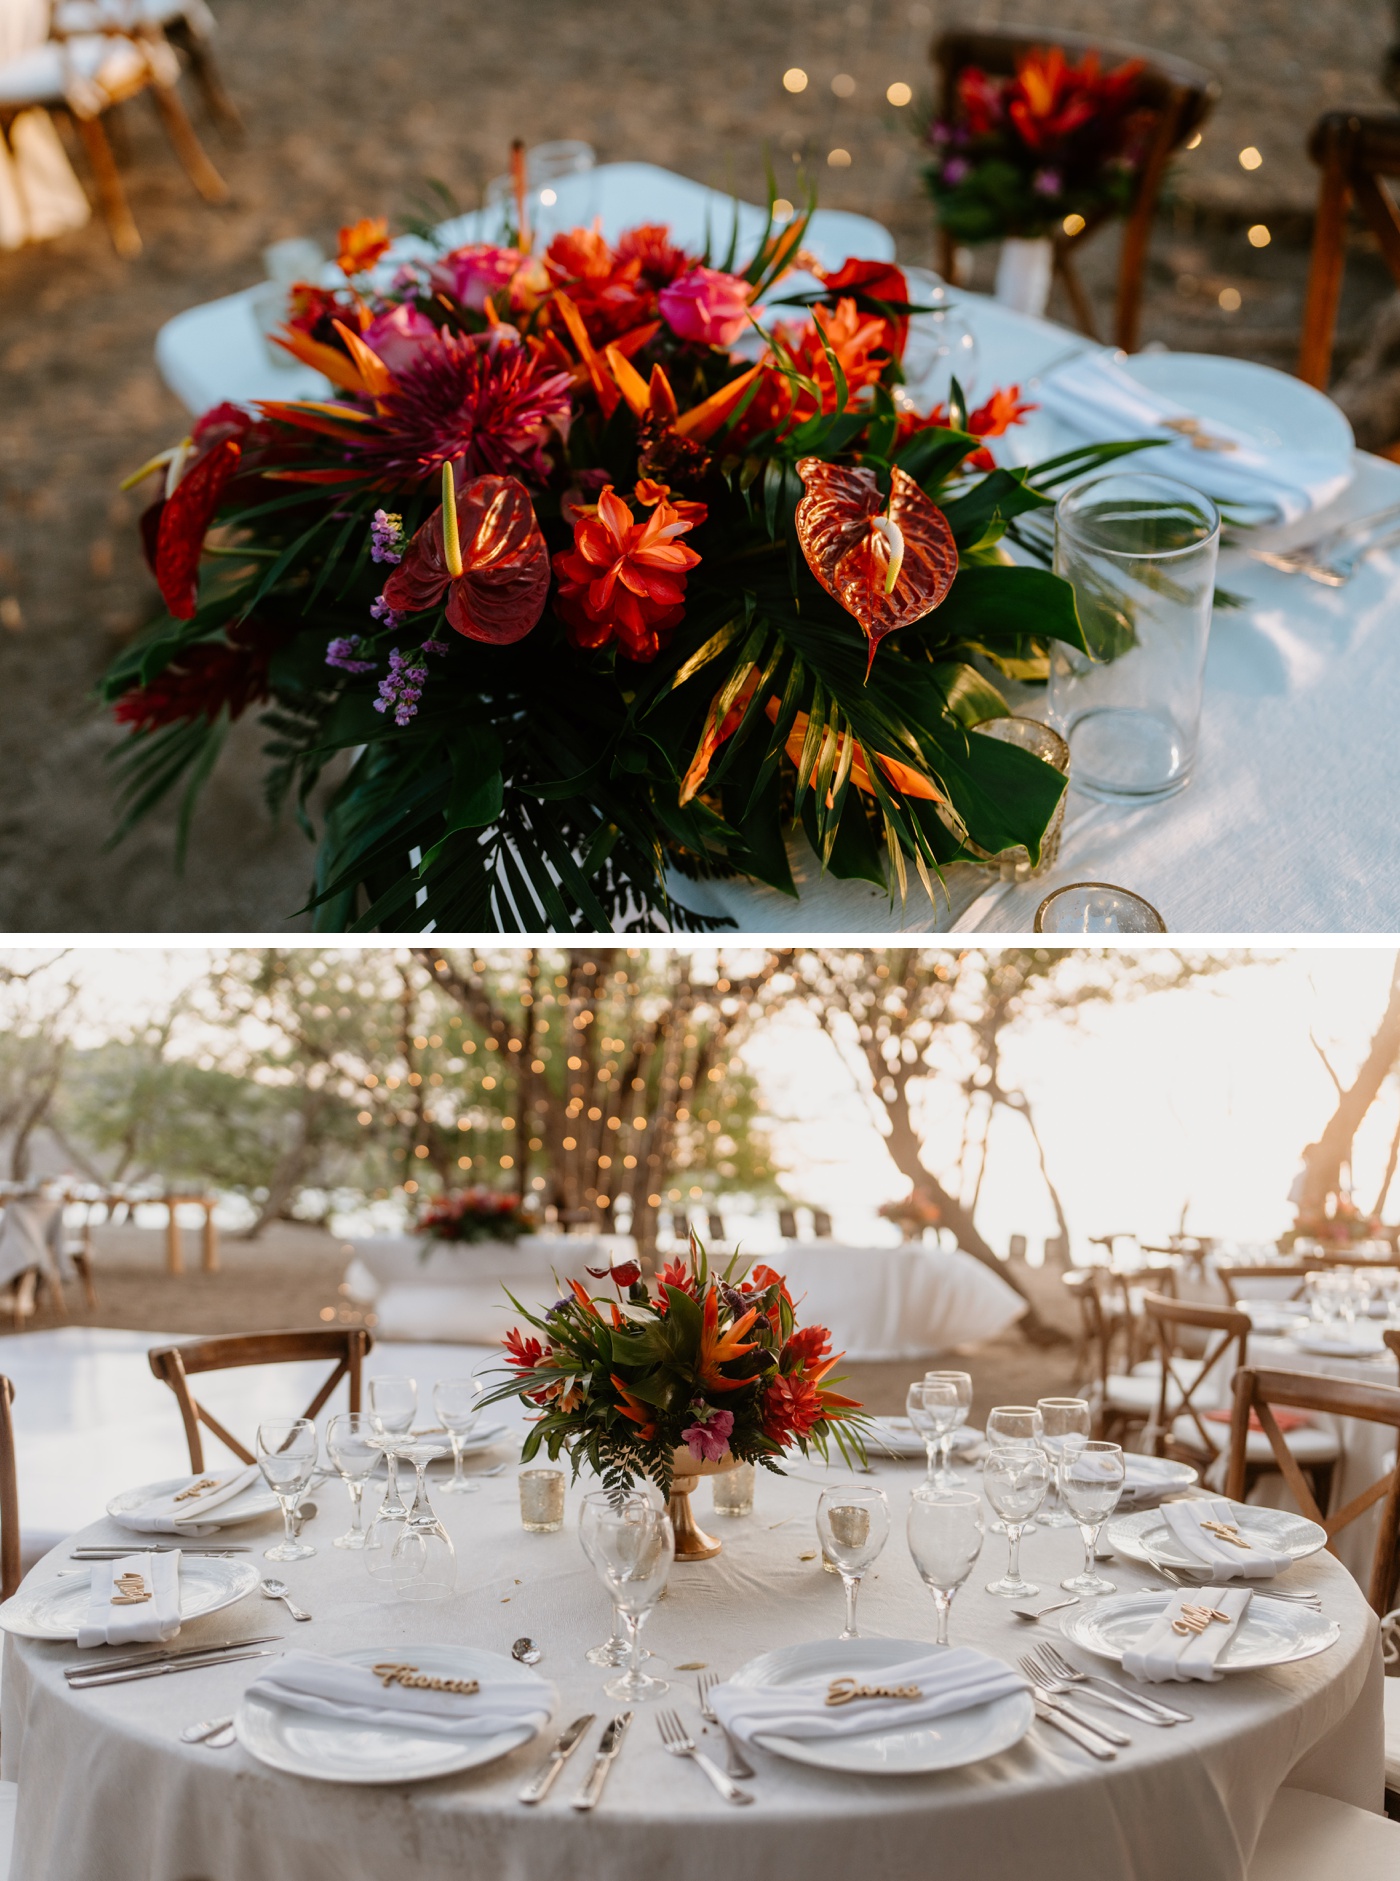 Tropical floral wedding centerpiece with anthurium and bird of paradise